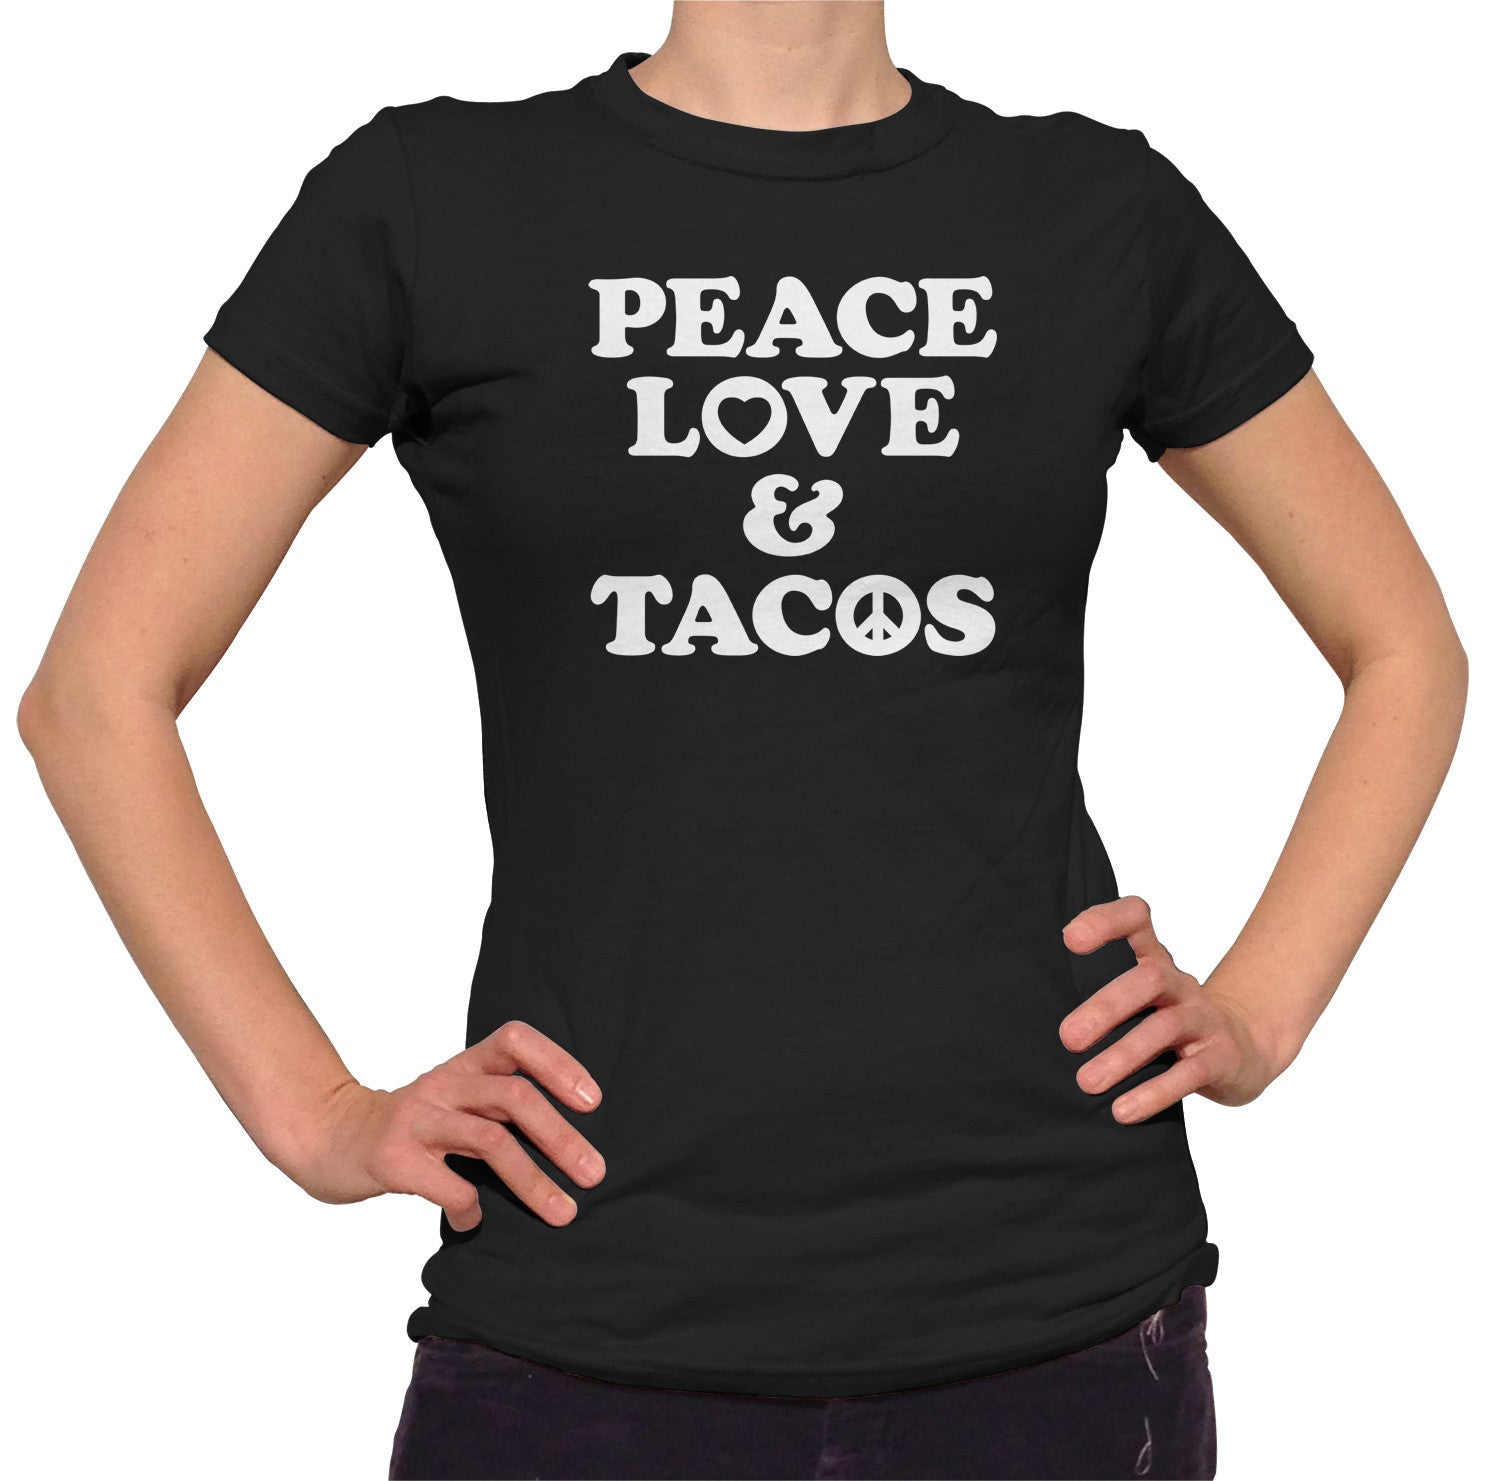 Women's Peace Love and Tacos T-Shirt